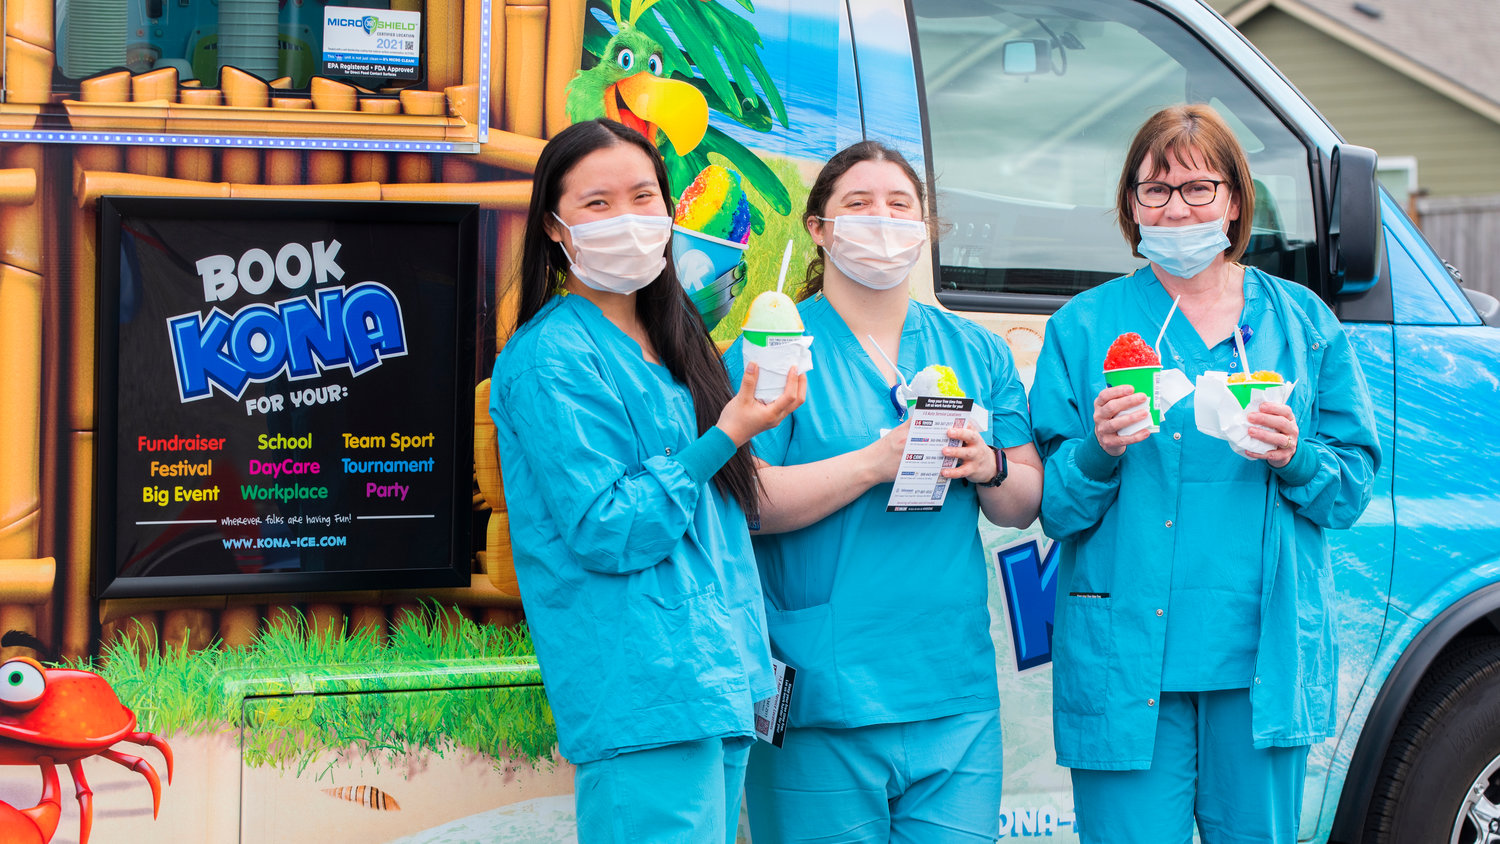 Kristine Wong, Amanda Coverdale and Sherry Zumbuhl pose for a photo in front of a Kona Ice truck Wednesday afternoon outside Providence Centralia Hospital during a caregiver appreciation event.